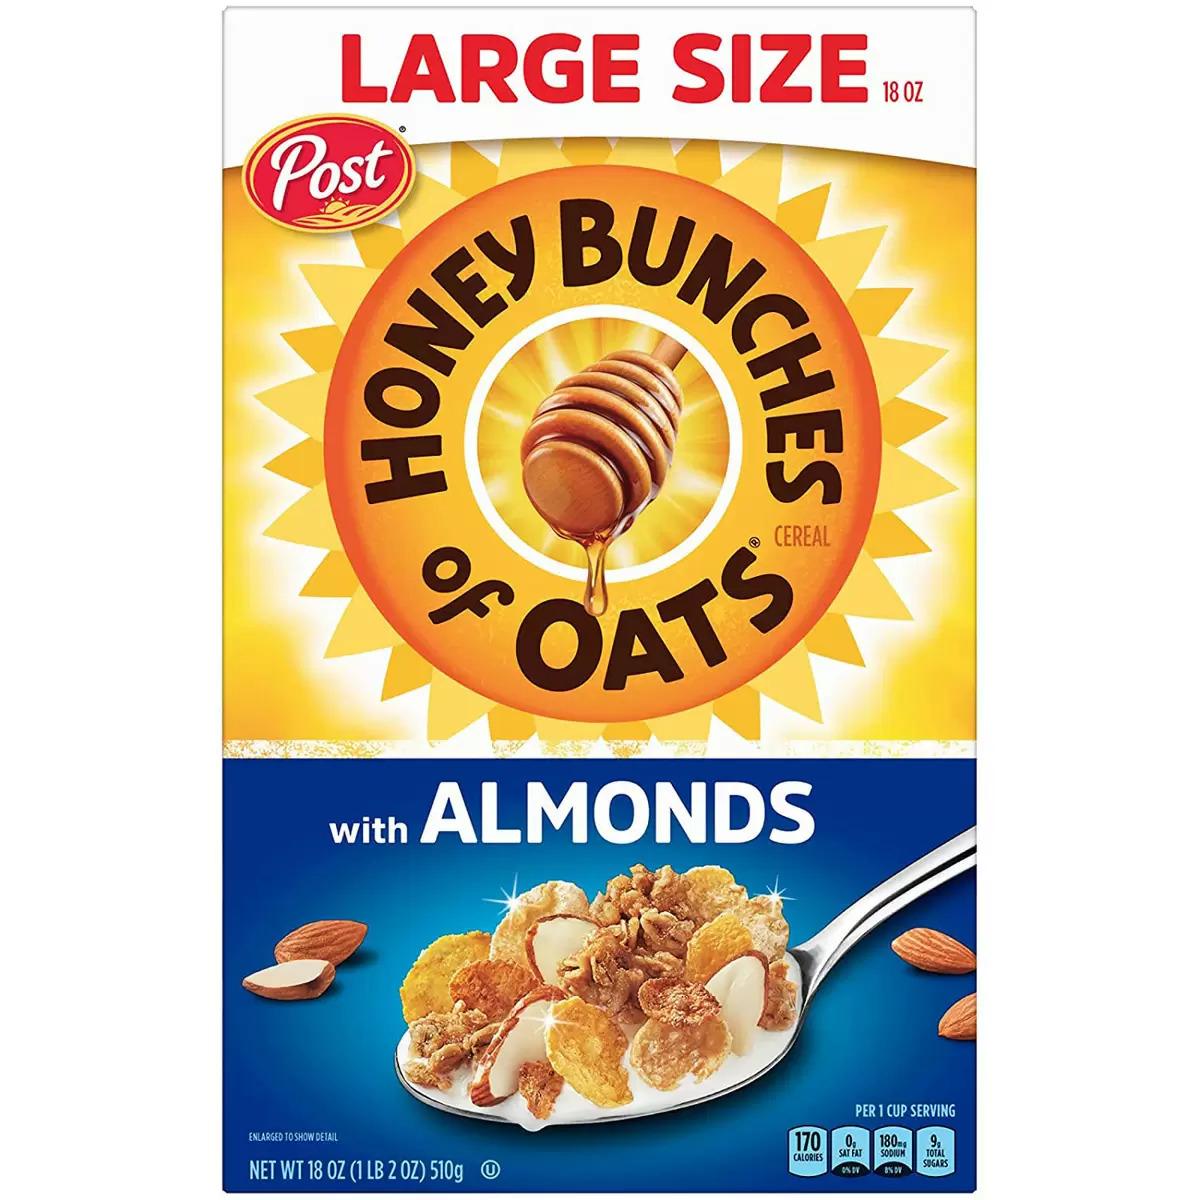 Honey Bunches of Oats with Almonds Whole Grain Cereal for $2.42 Shipped